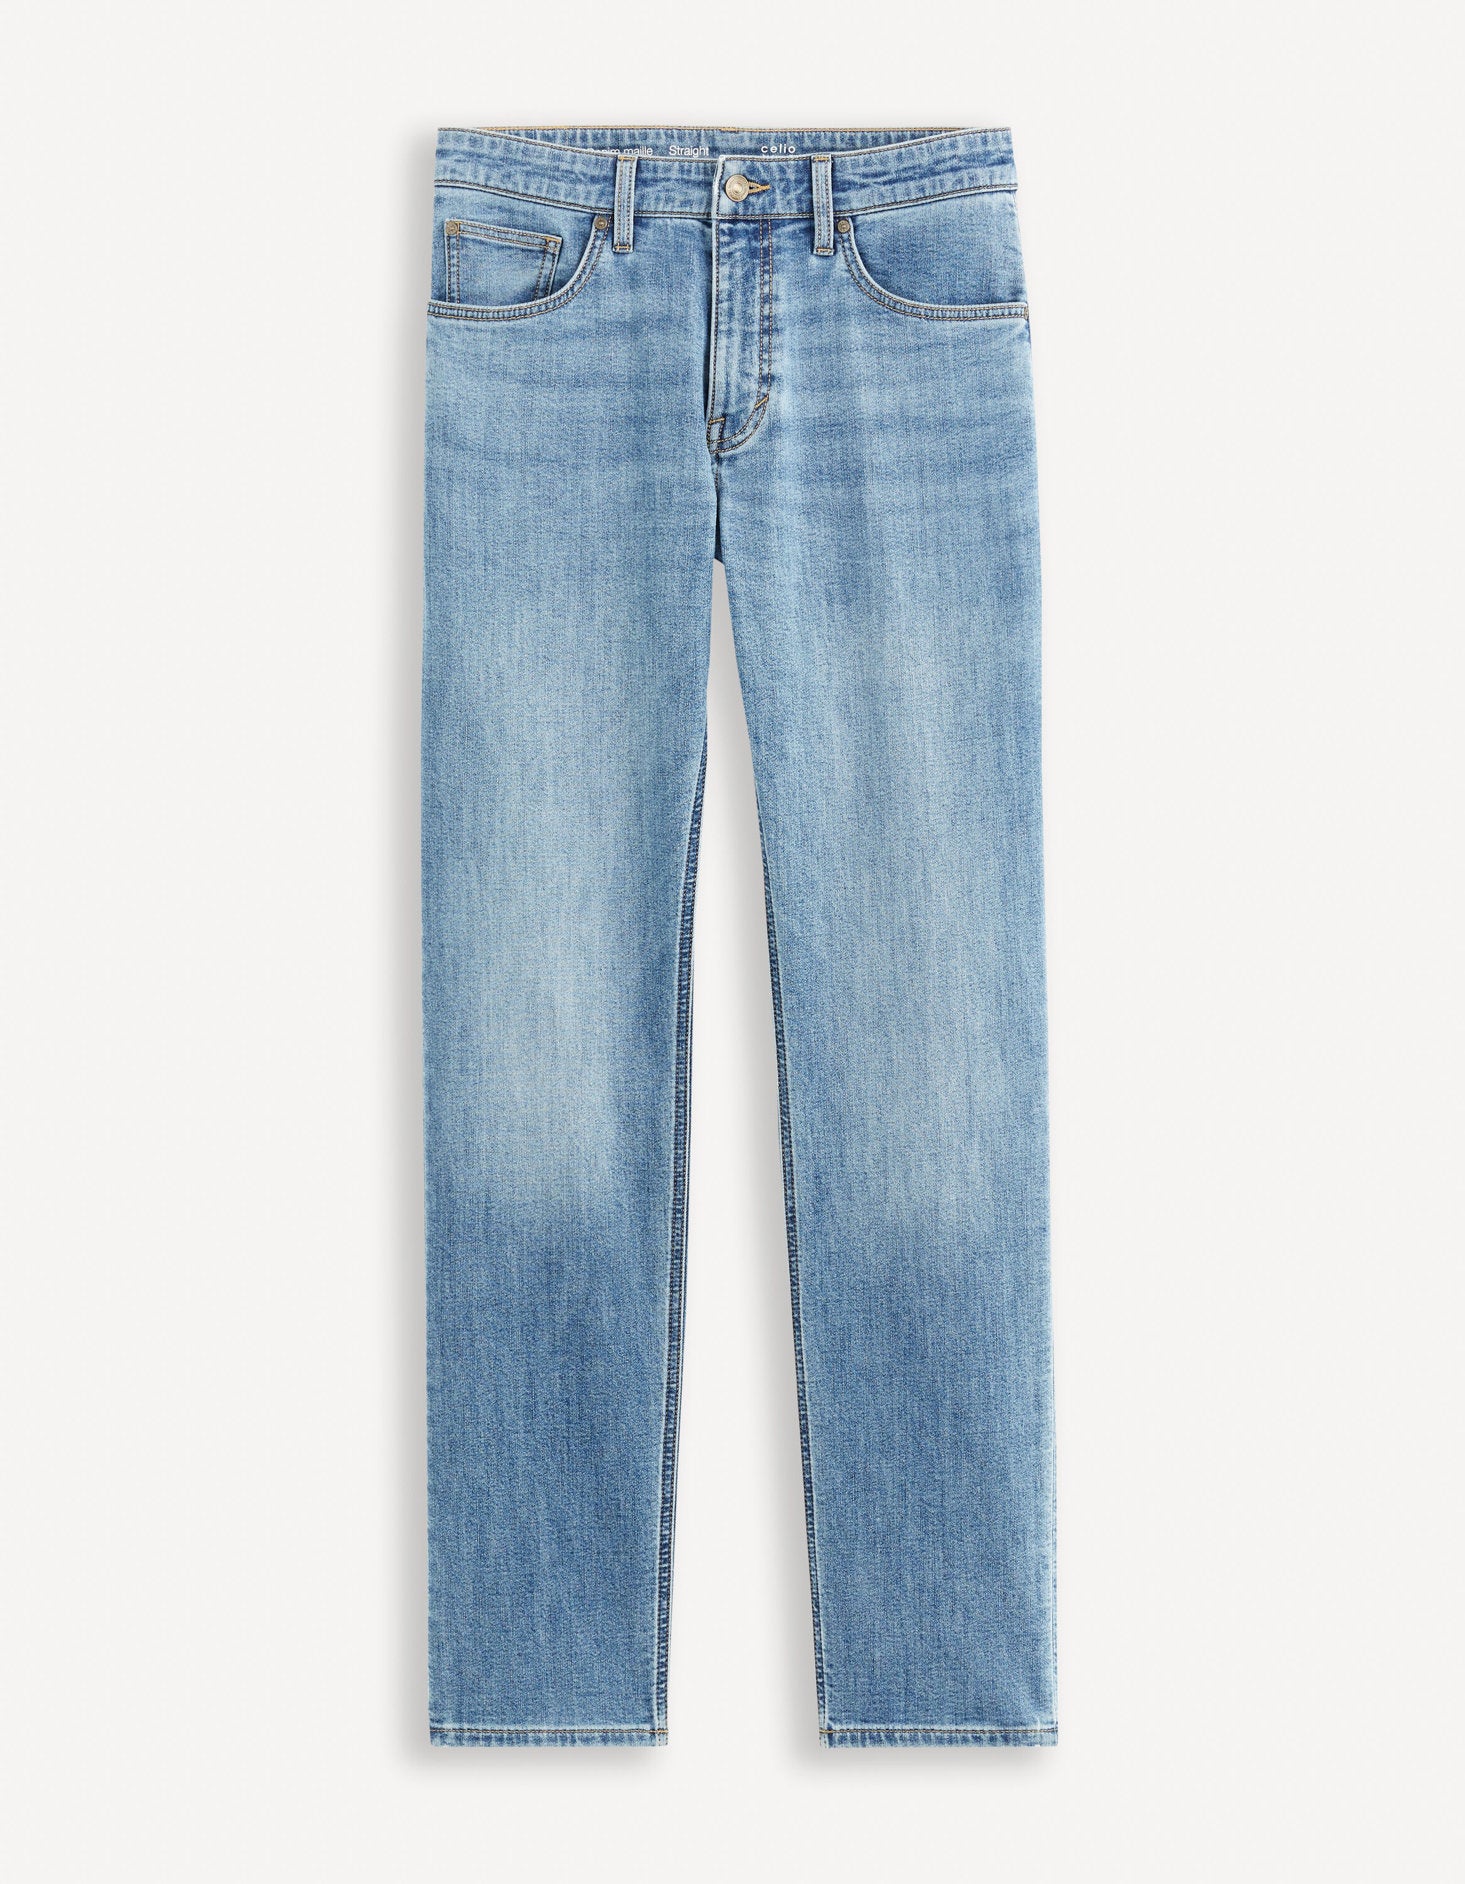 C15 3-Length Straight Jeans - Bleached_DOKLIGHT15_BLEACHED_02